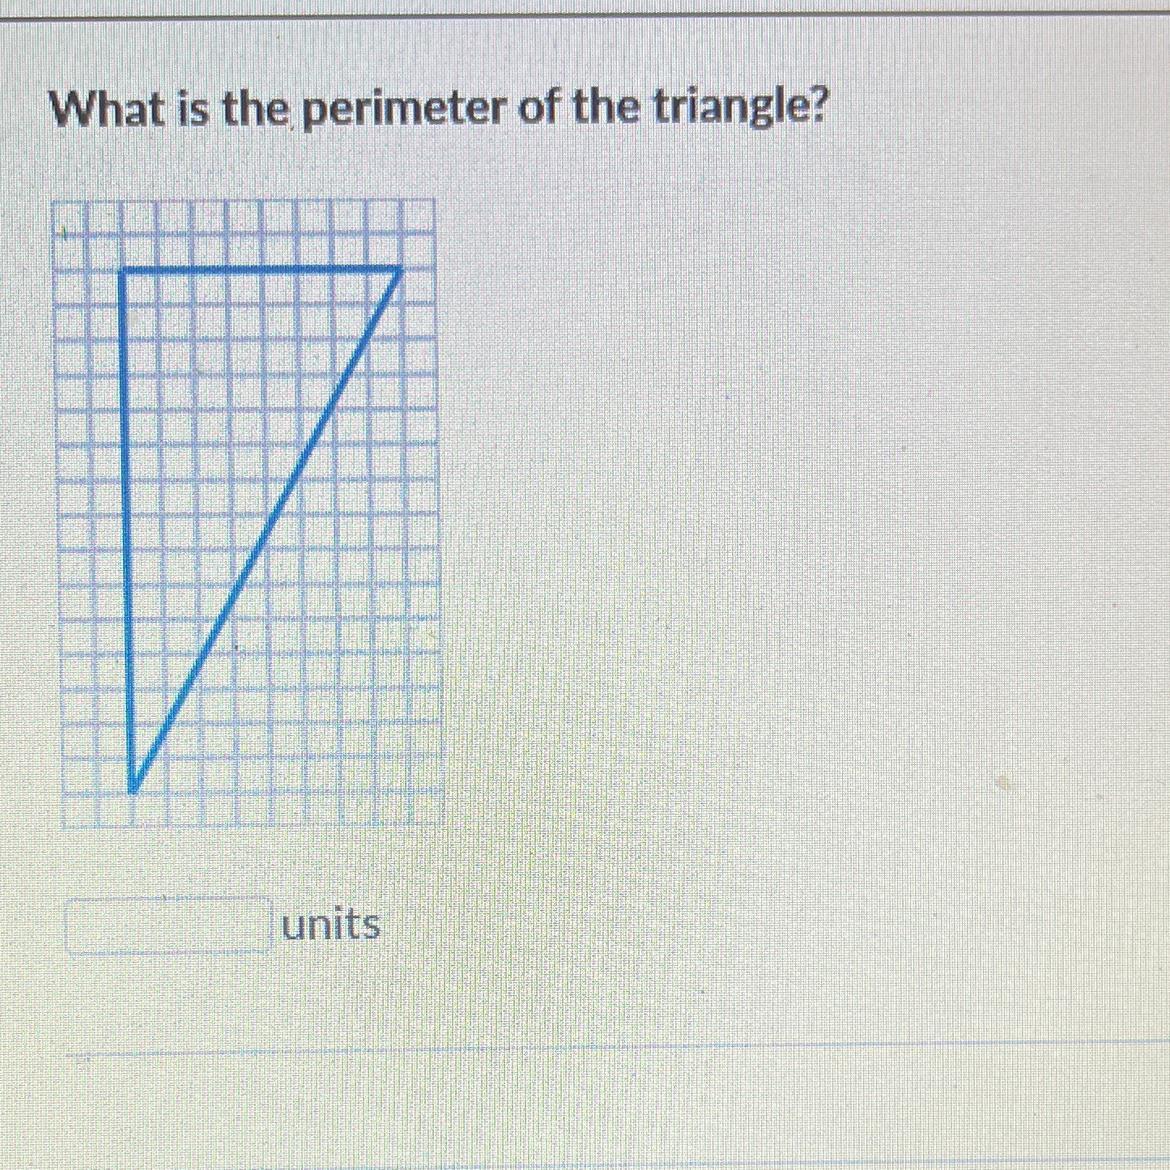 What Is The Perimeter Of The Triangle?